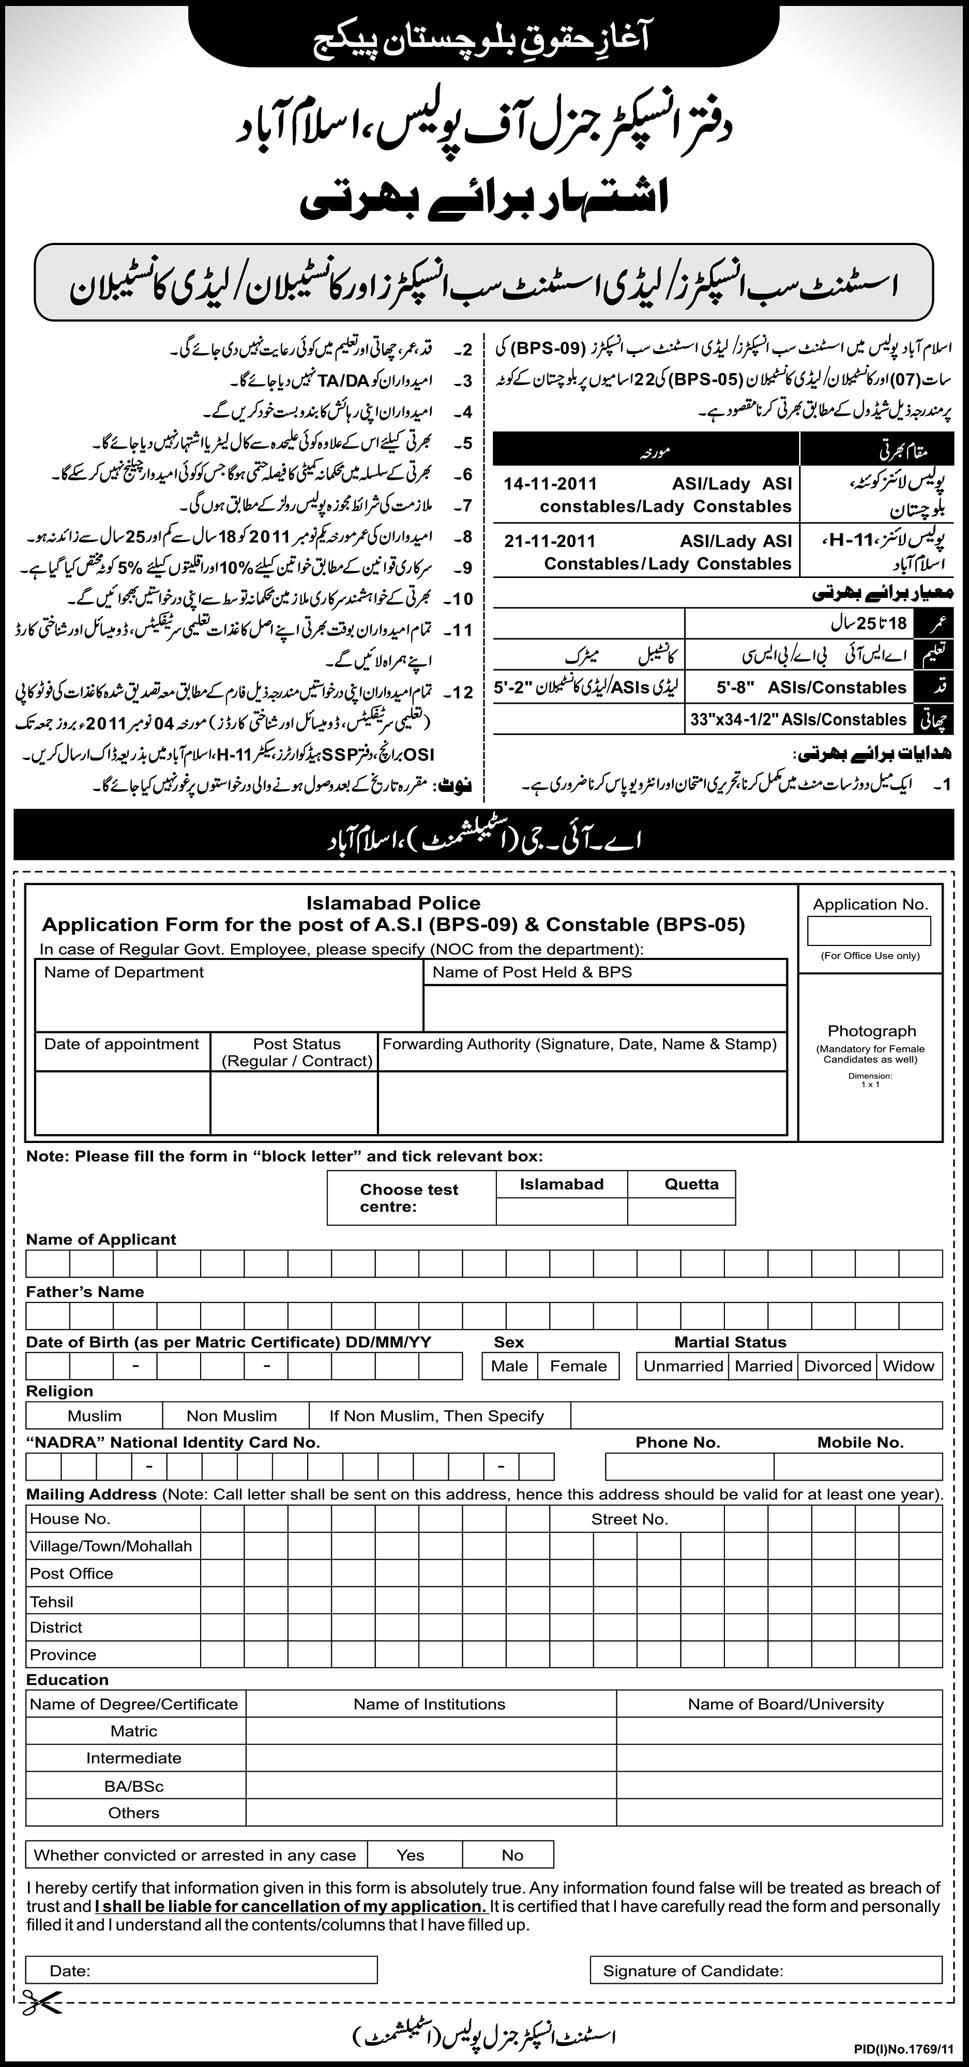 Office of Inspector General of Police, Islamabad Jobs Opportunities